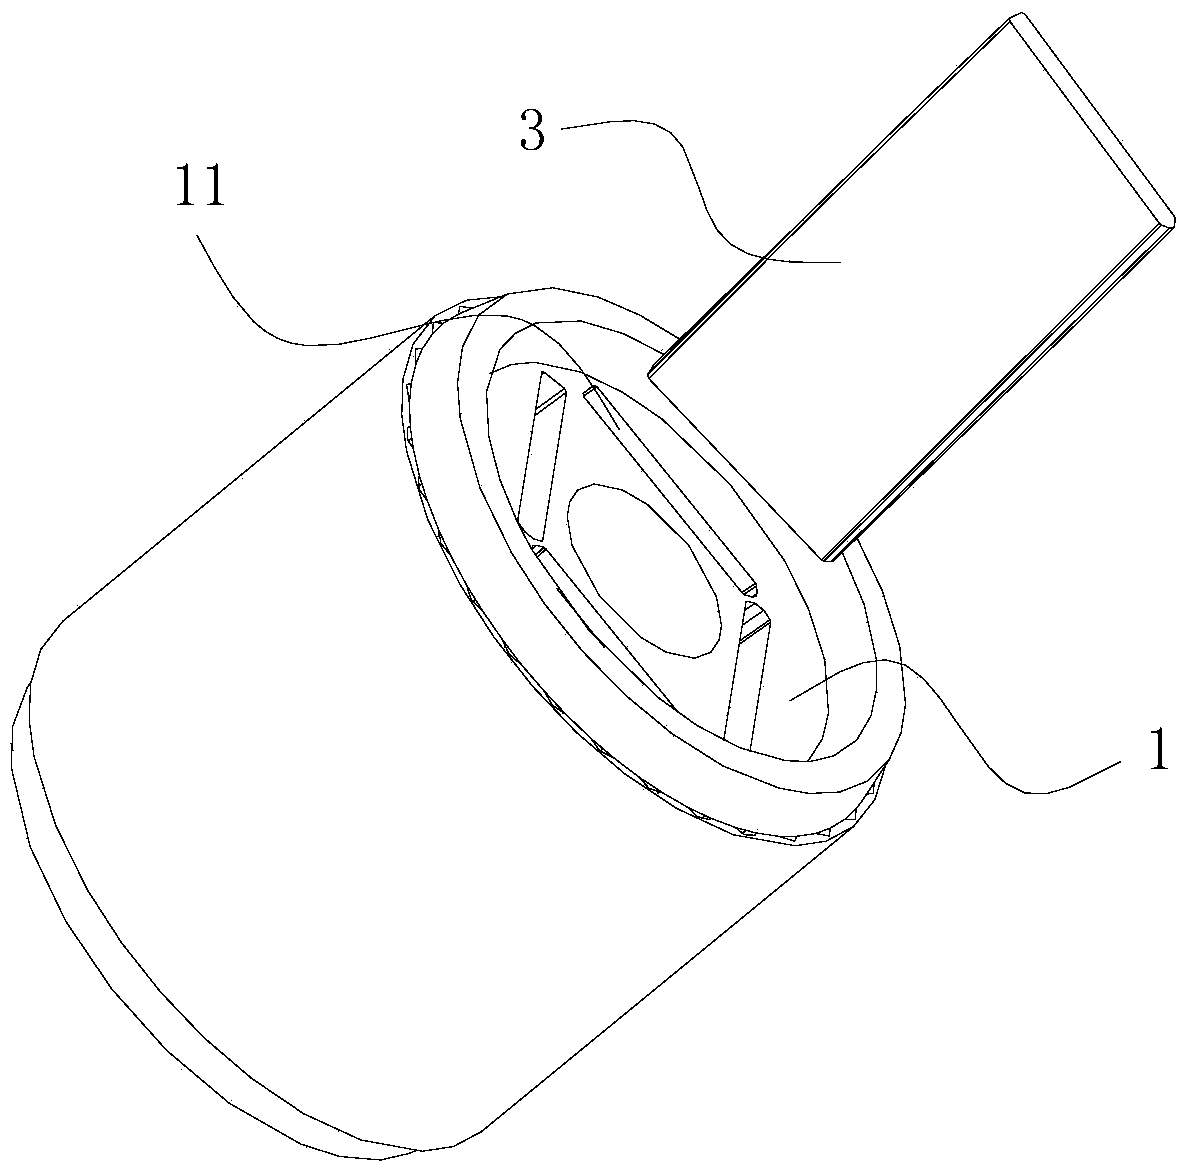 Motor rotor and self-starting synchronous motor